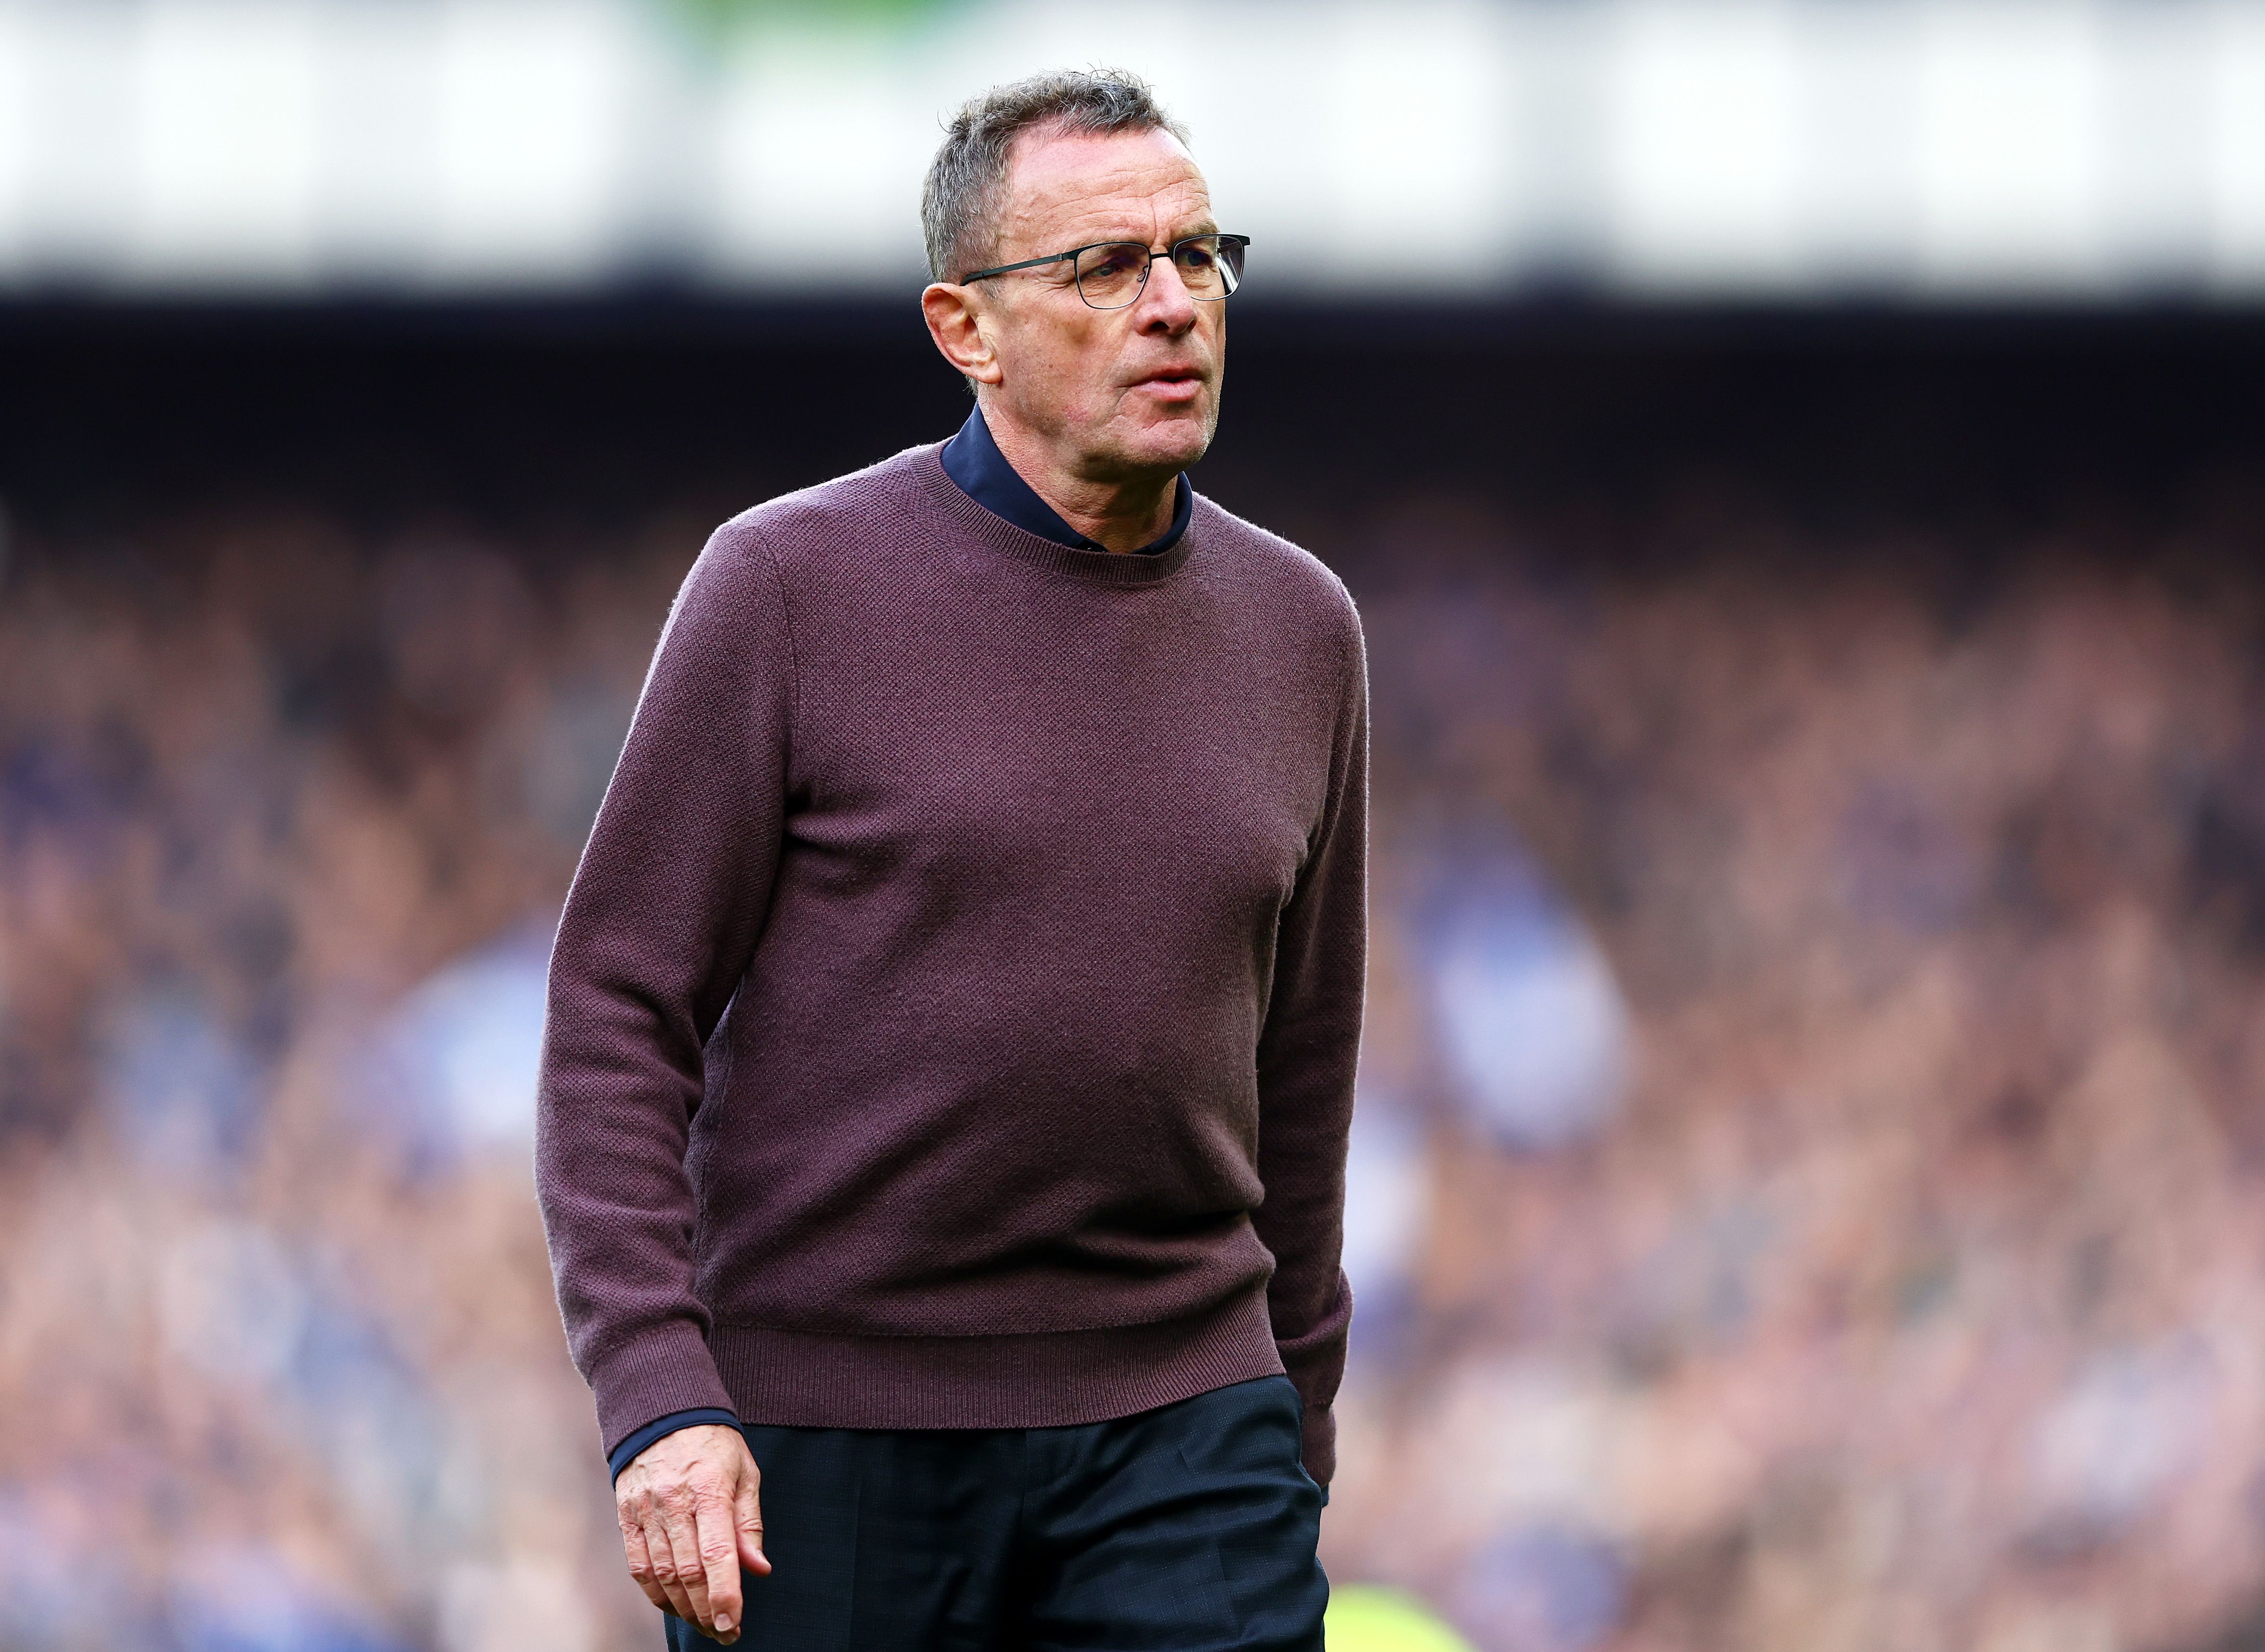 Rangnick will not remain at United for his consultancy role as planned